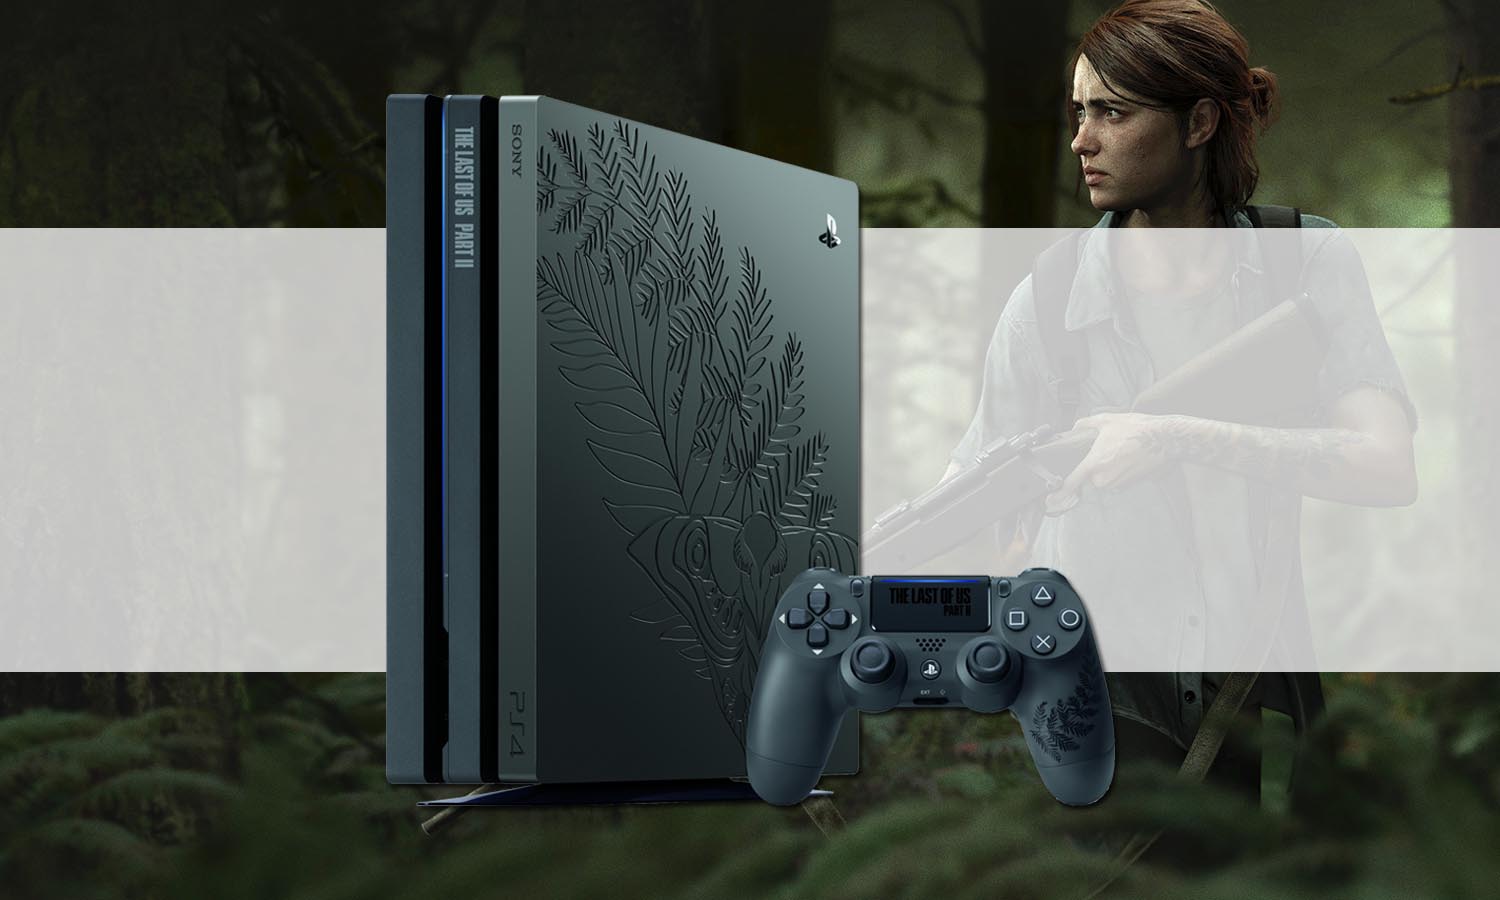 ps4 pro the last of us 2 console